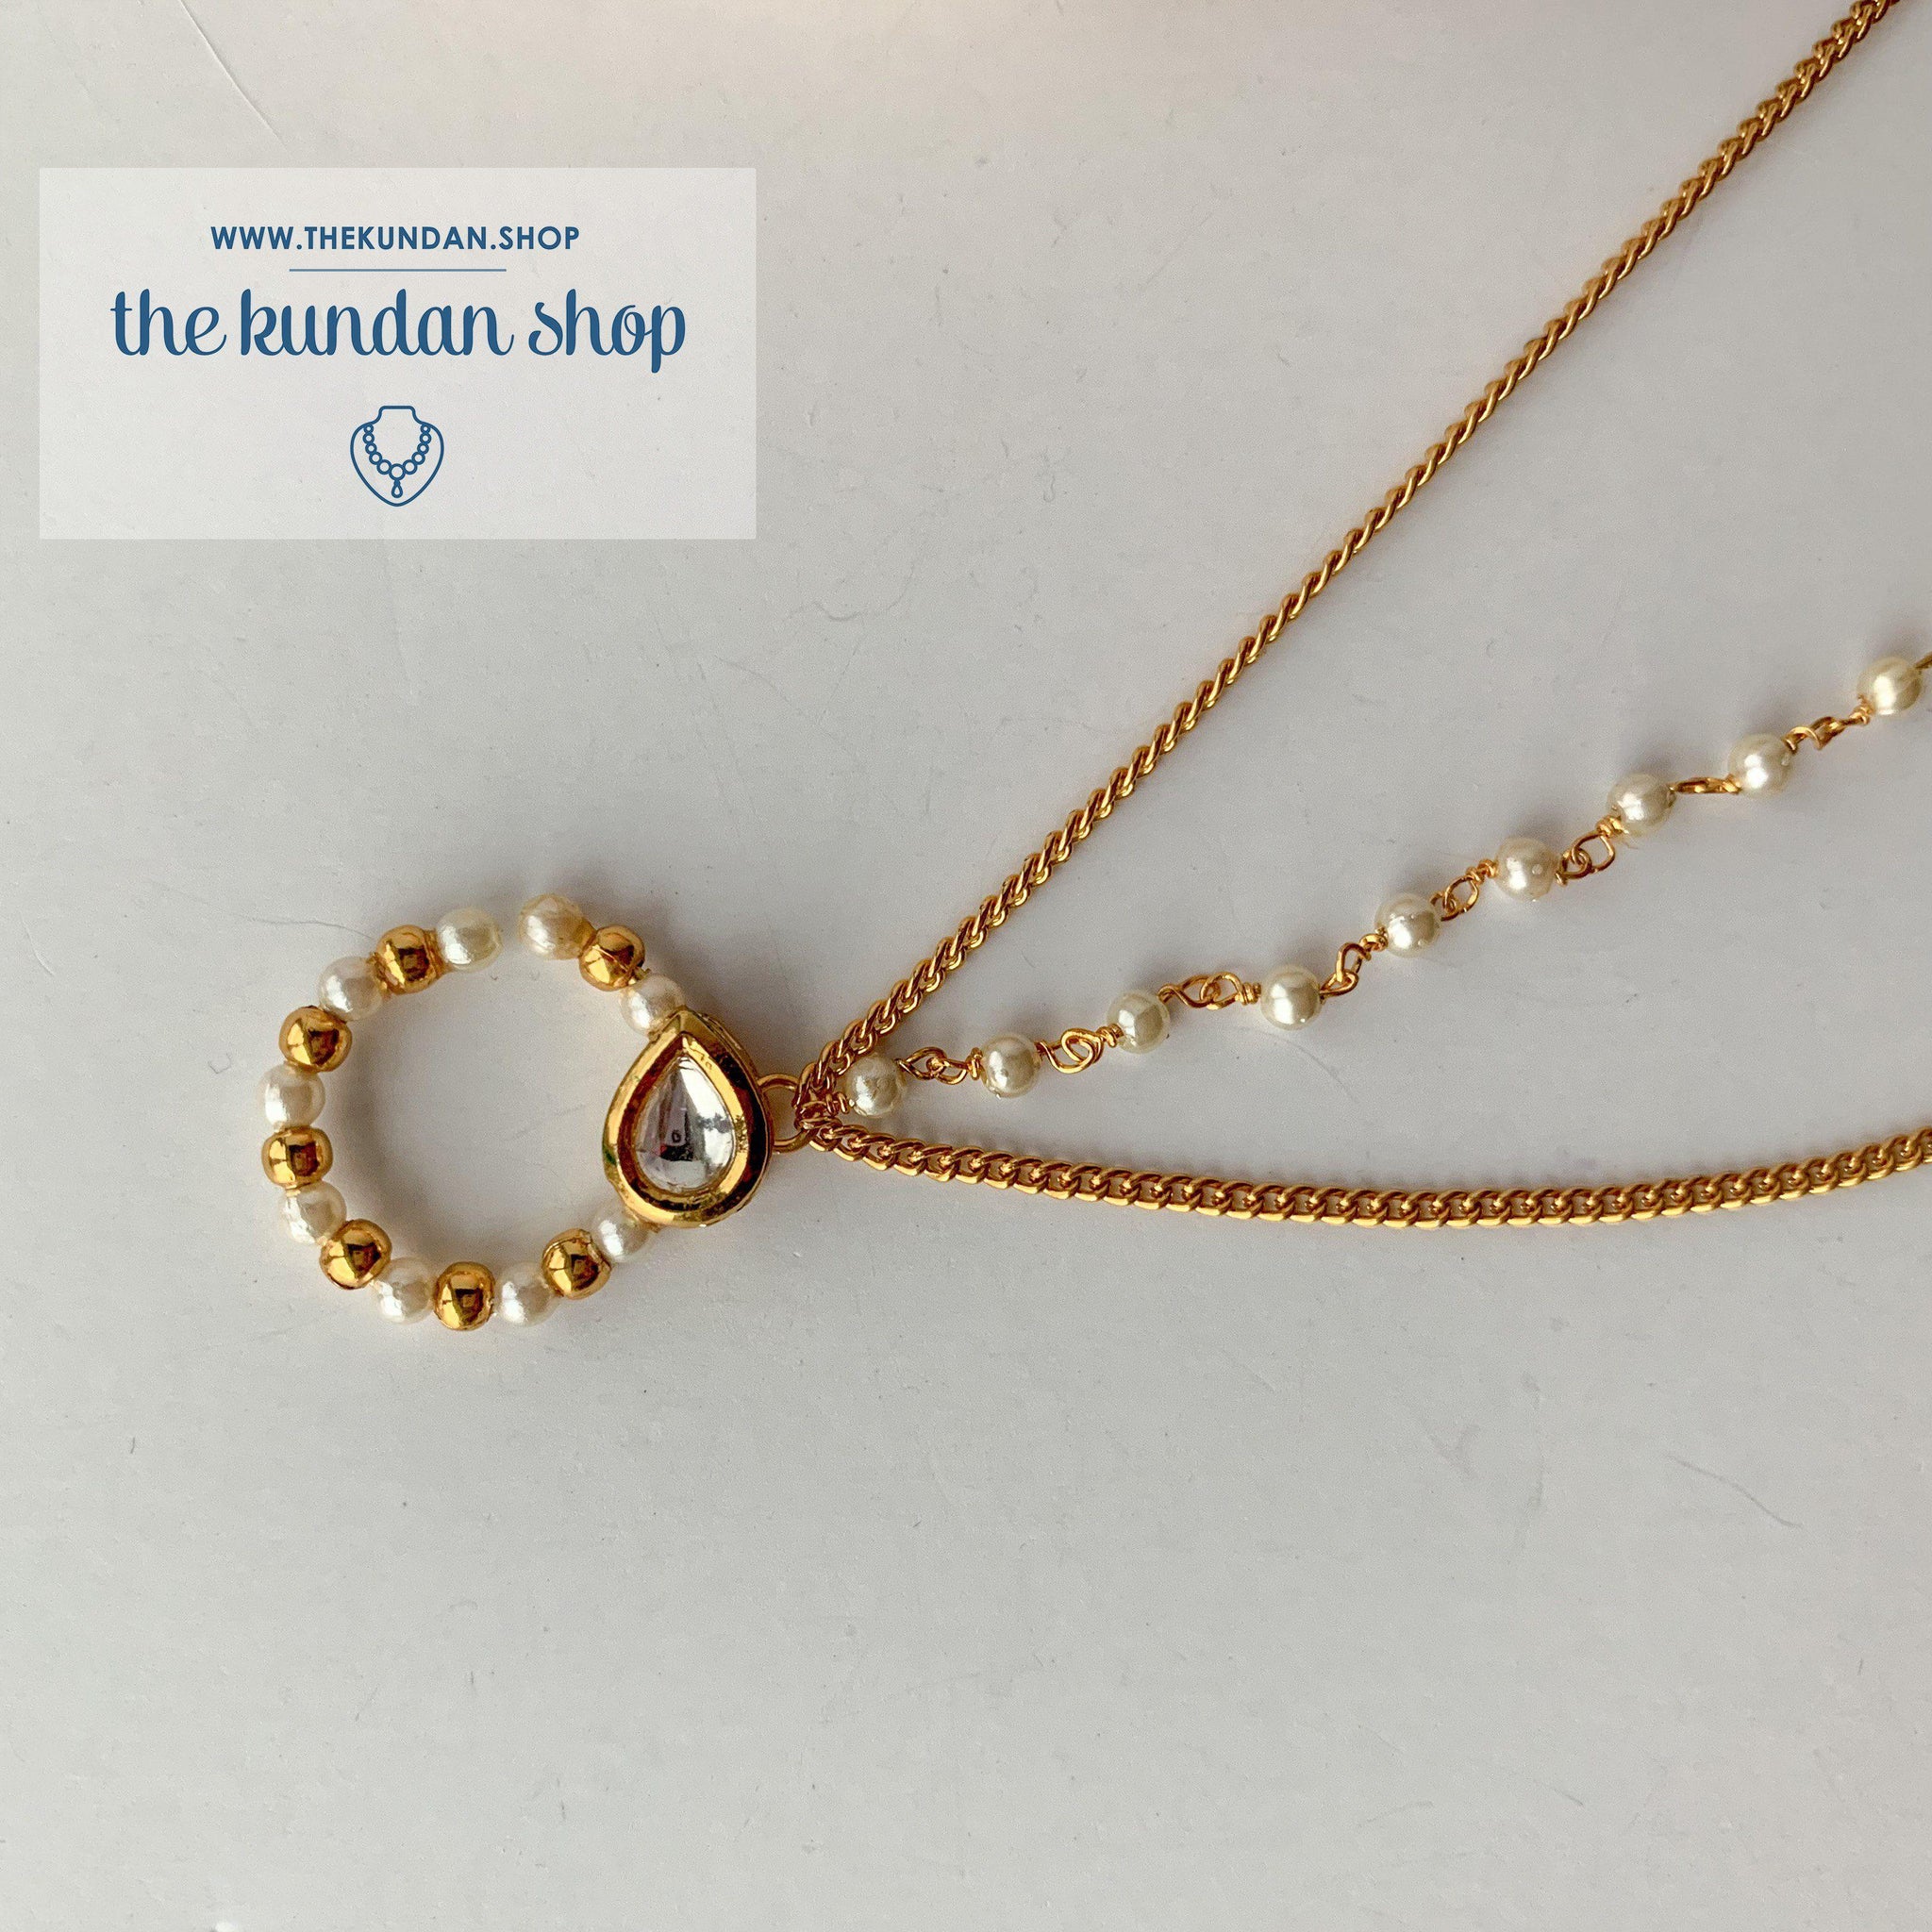 Nose Naaths (nose rings)– THE KUNDAN SHOP